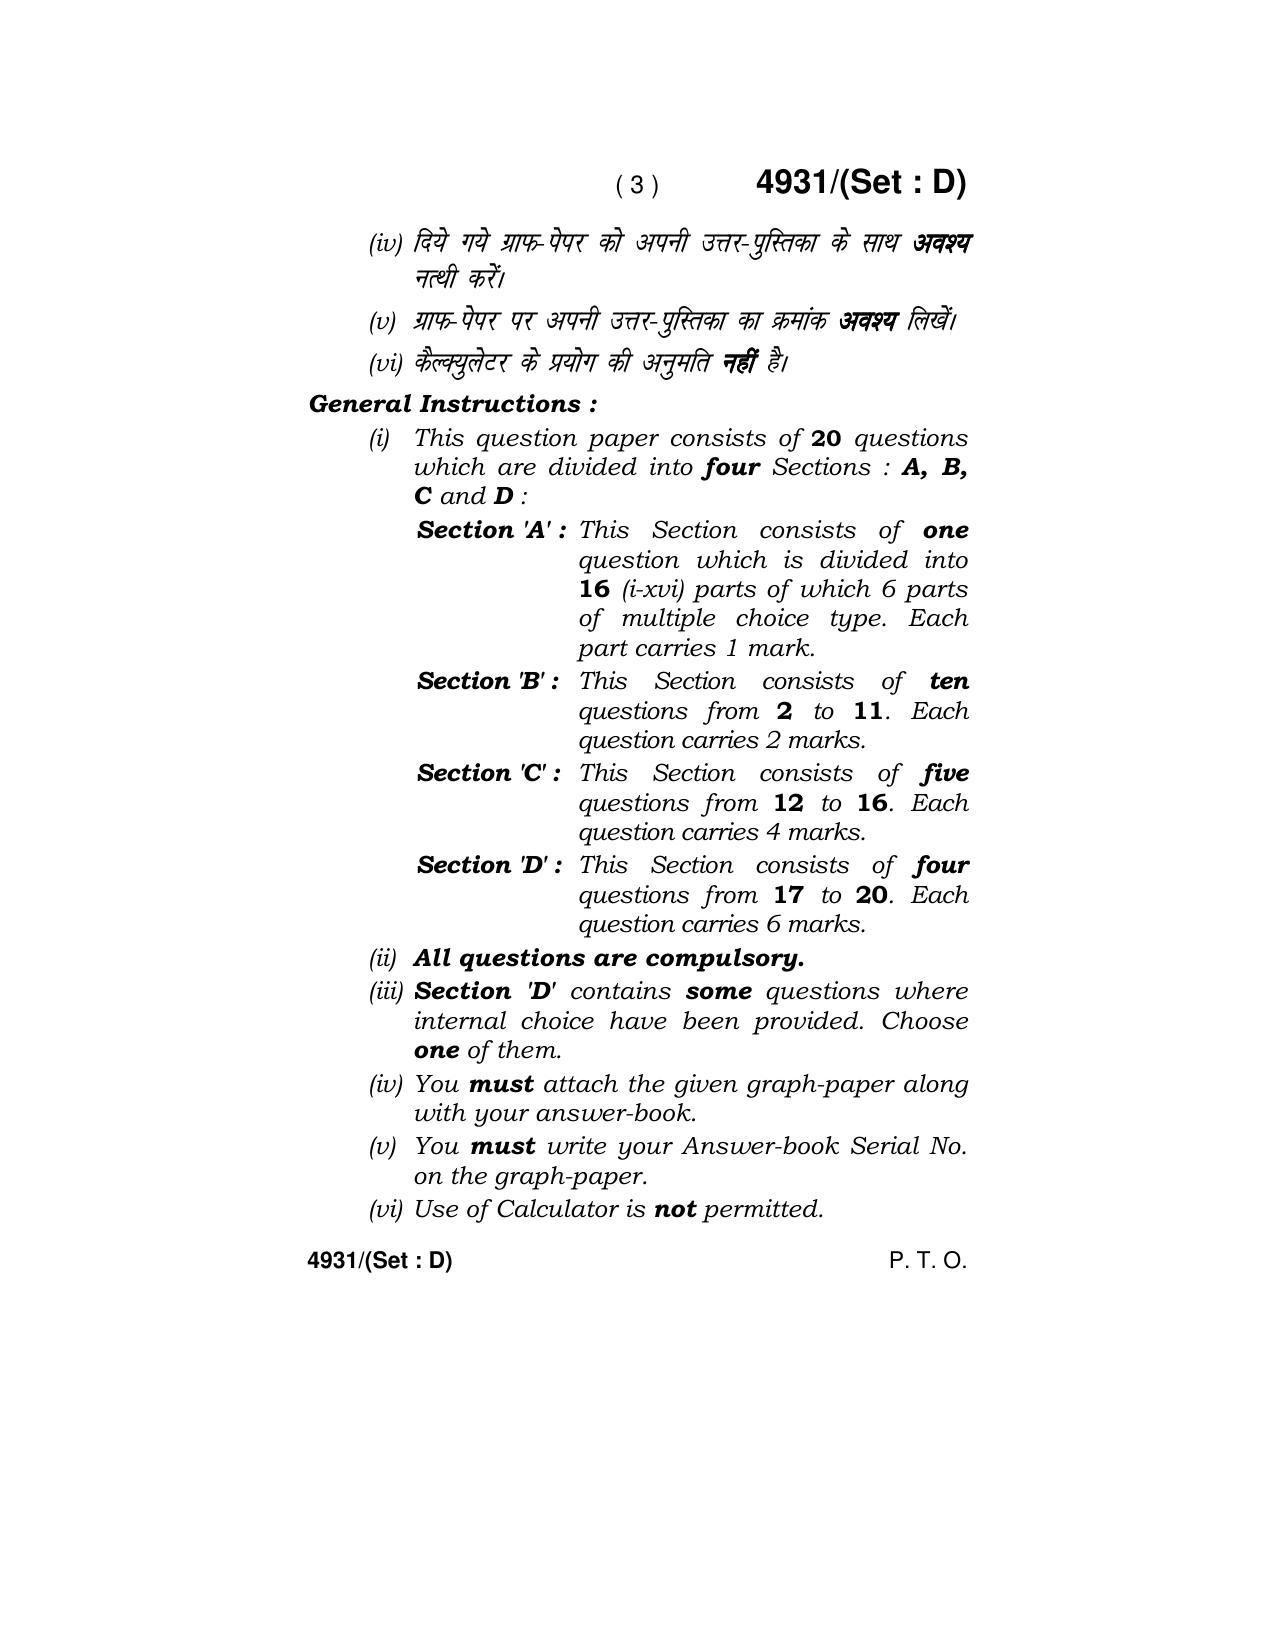 Haryana Board HBSE Class 12 Mathematics 2020 Question Paper - Page 51